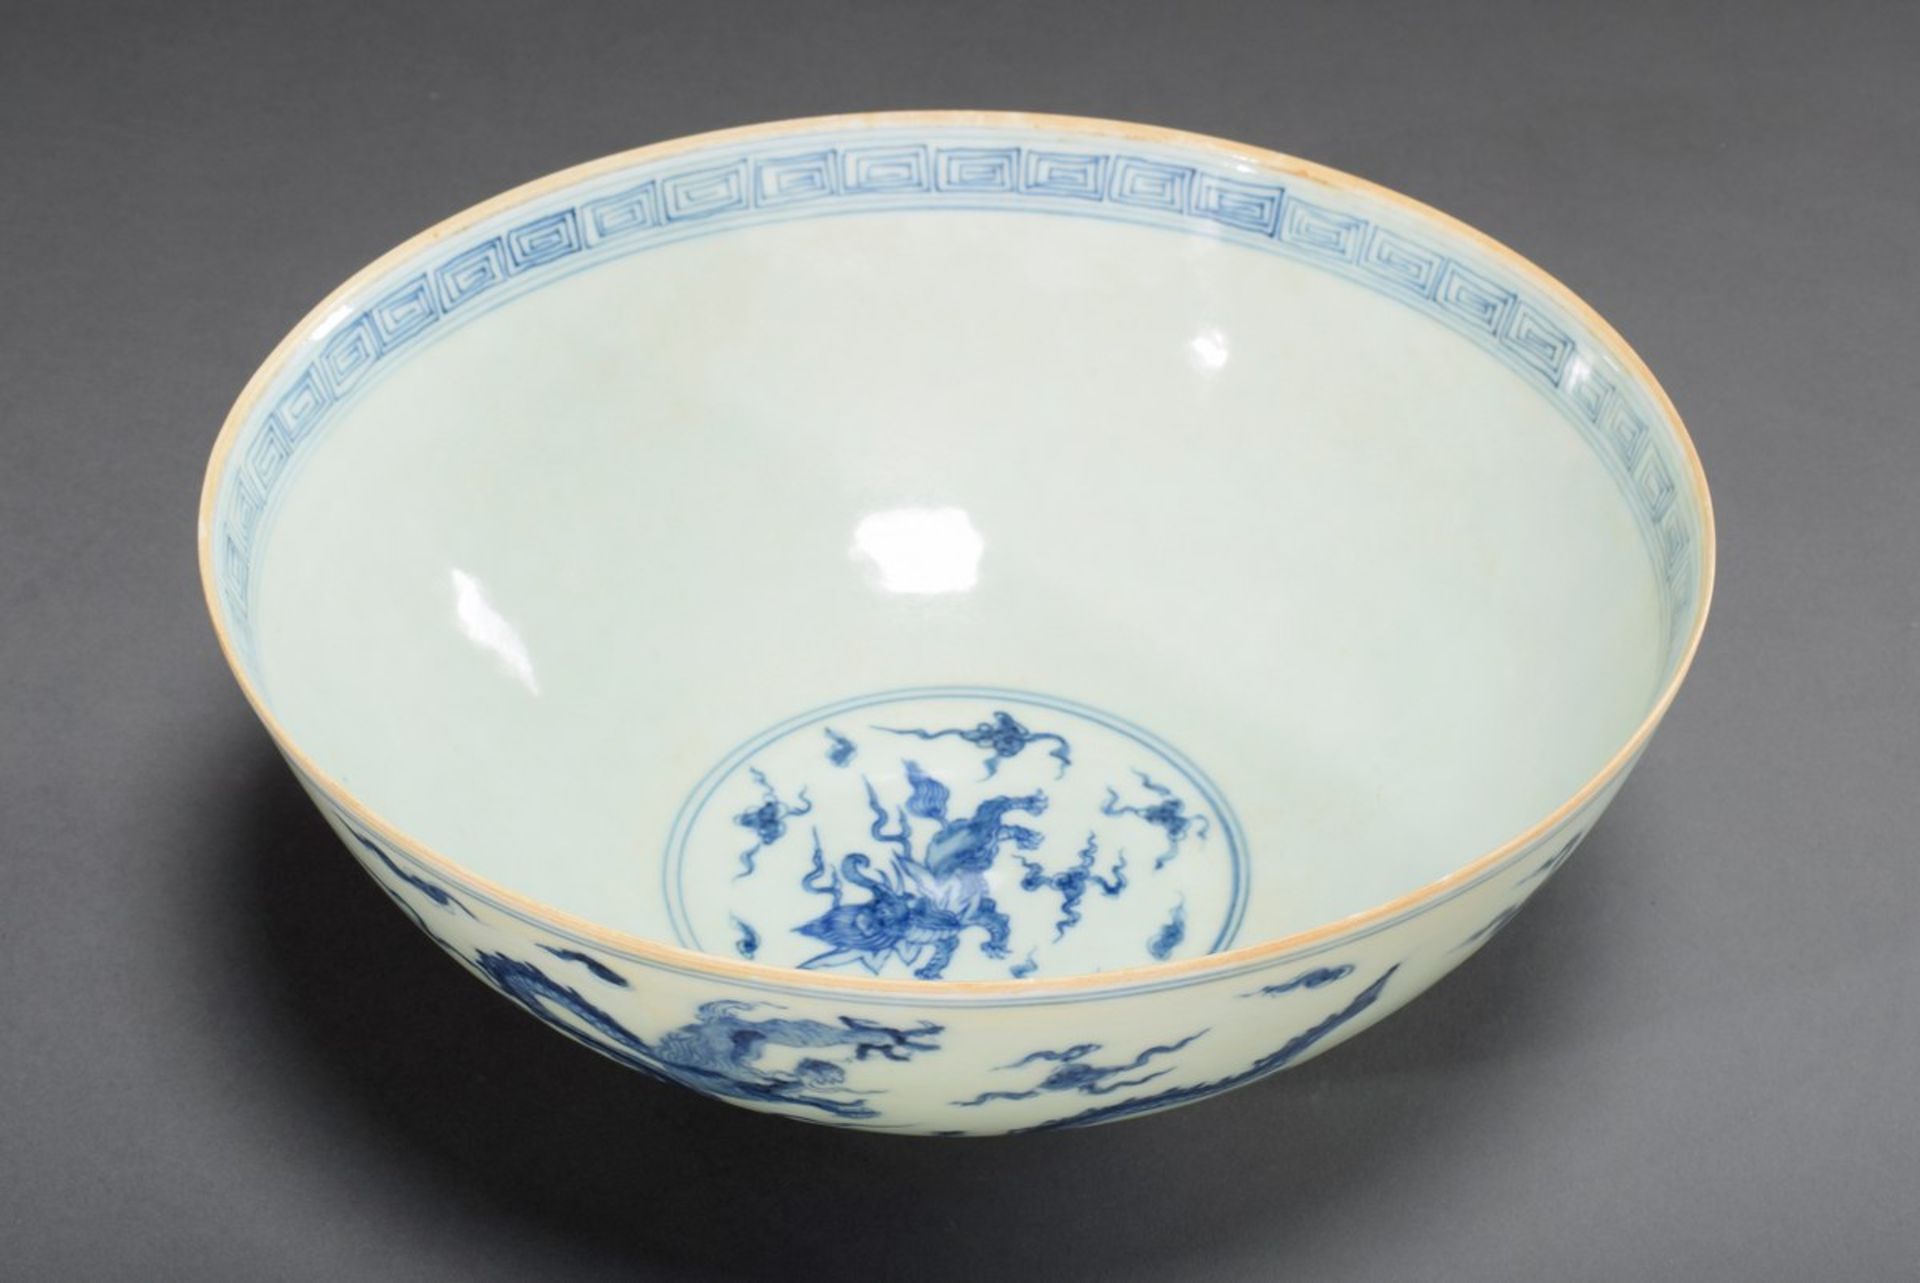 Thin-walled Chinese porcelain bowl with blue painting decor "Cloud Dragon" and "Baku", at the botto - Image 2 of 6